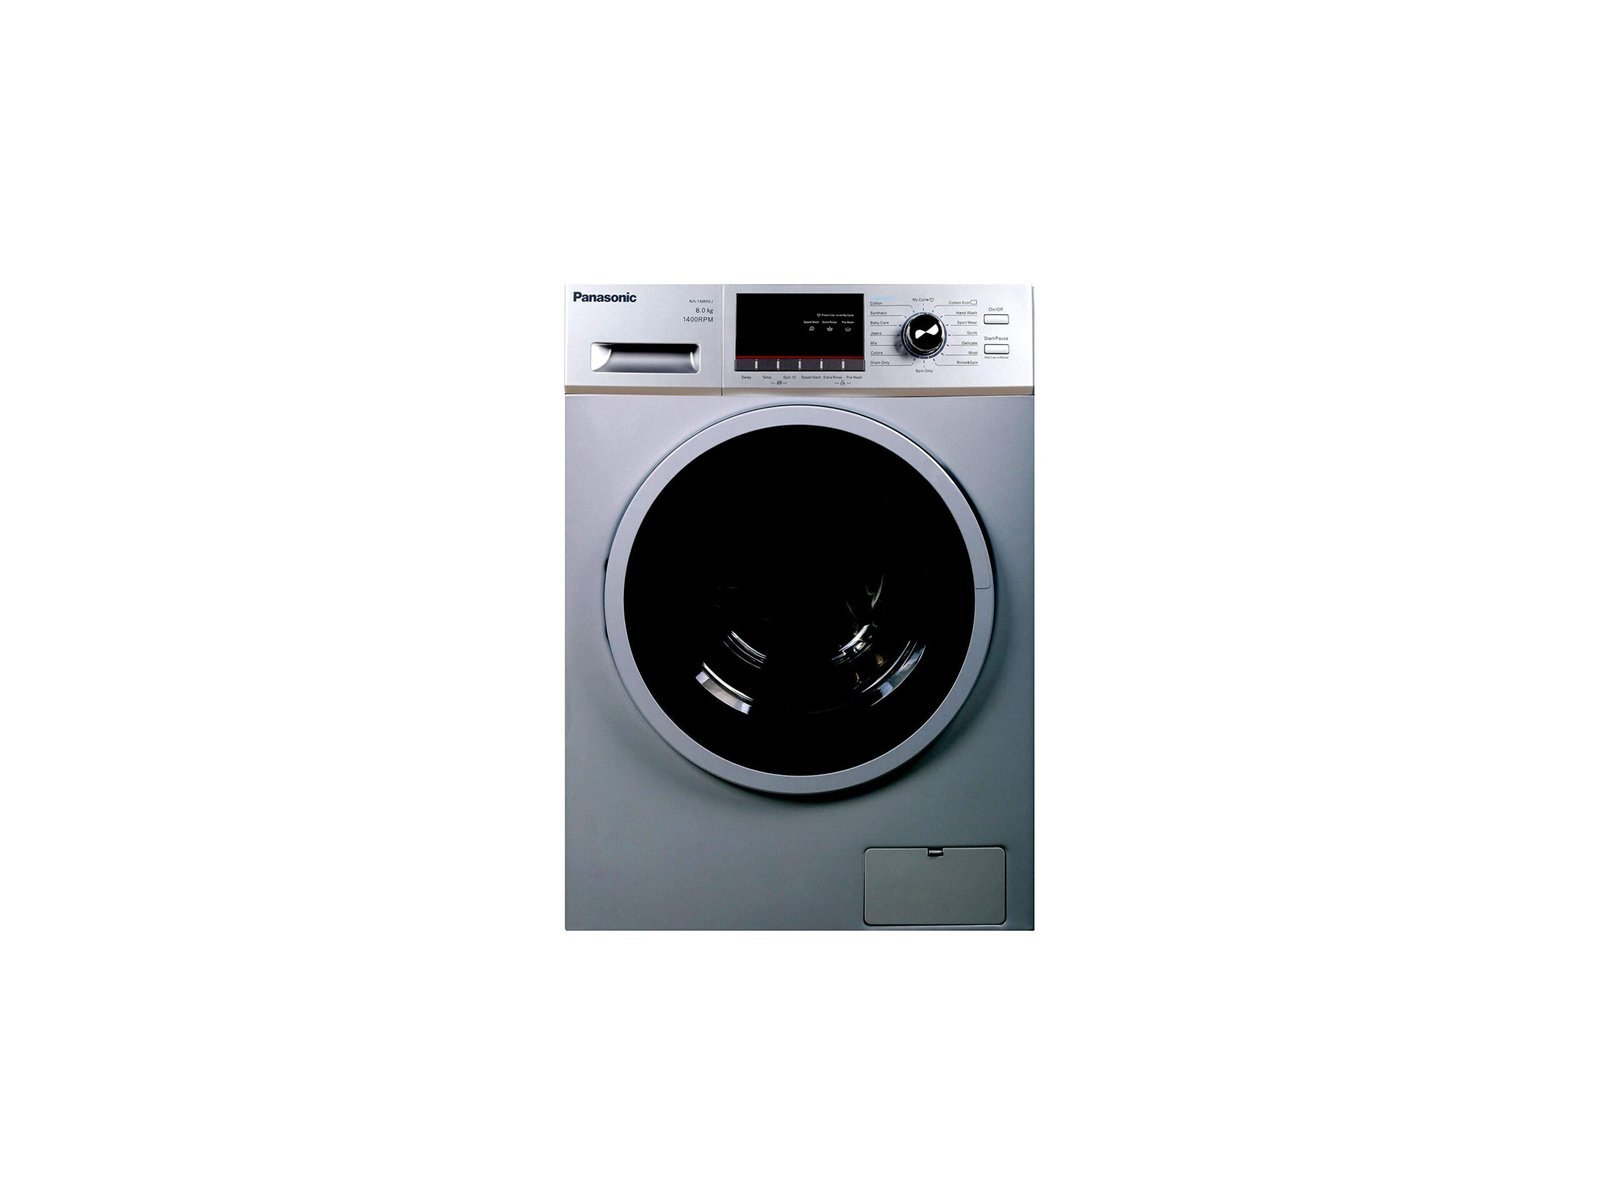 Panasonic 8 kg Front Load Washing Machine 1400 rpm Color Silver Model- NA-148MB3 |  1 Year Full 10 Years Motor Warranty.